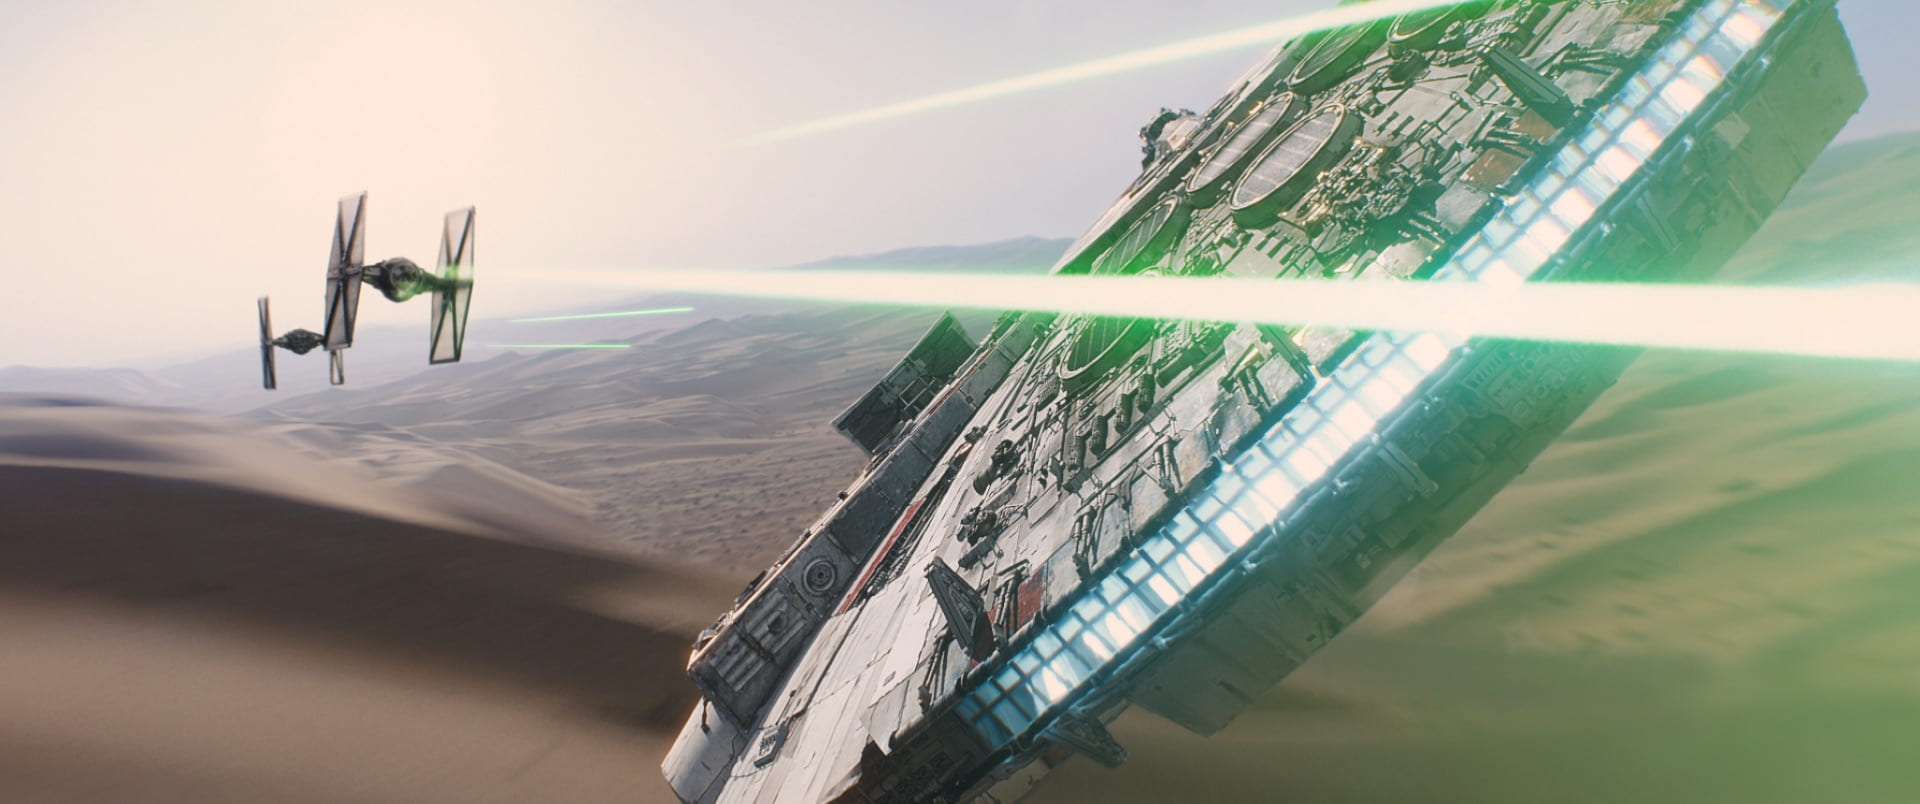 The Millennium Falcon flies at TIE Fighters in The Force Awakens